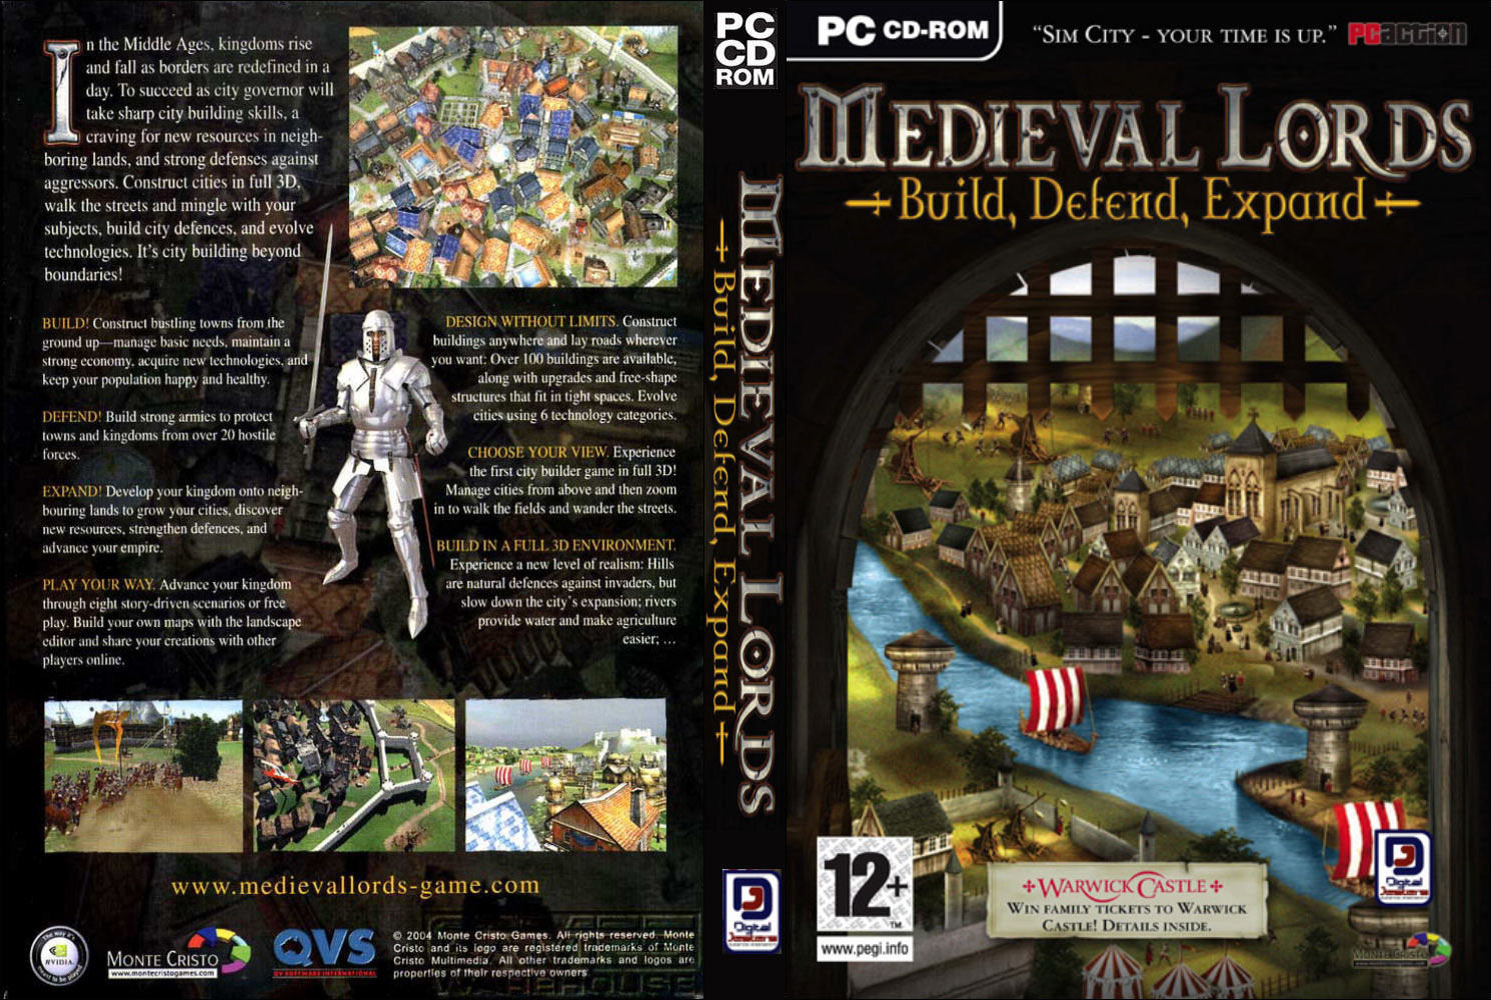 Medieval Lords: Build, Defend, Expand - DVD obal